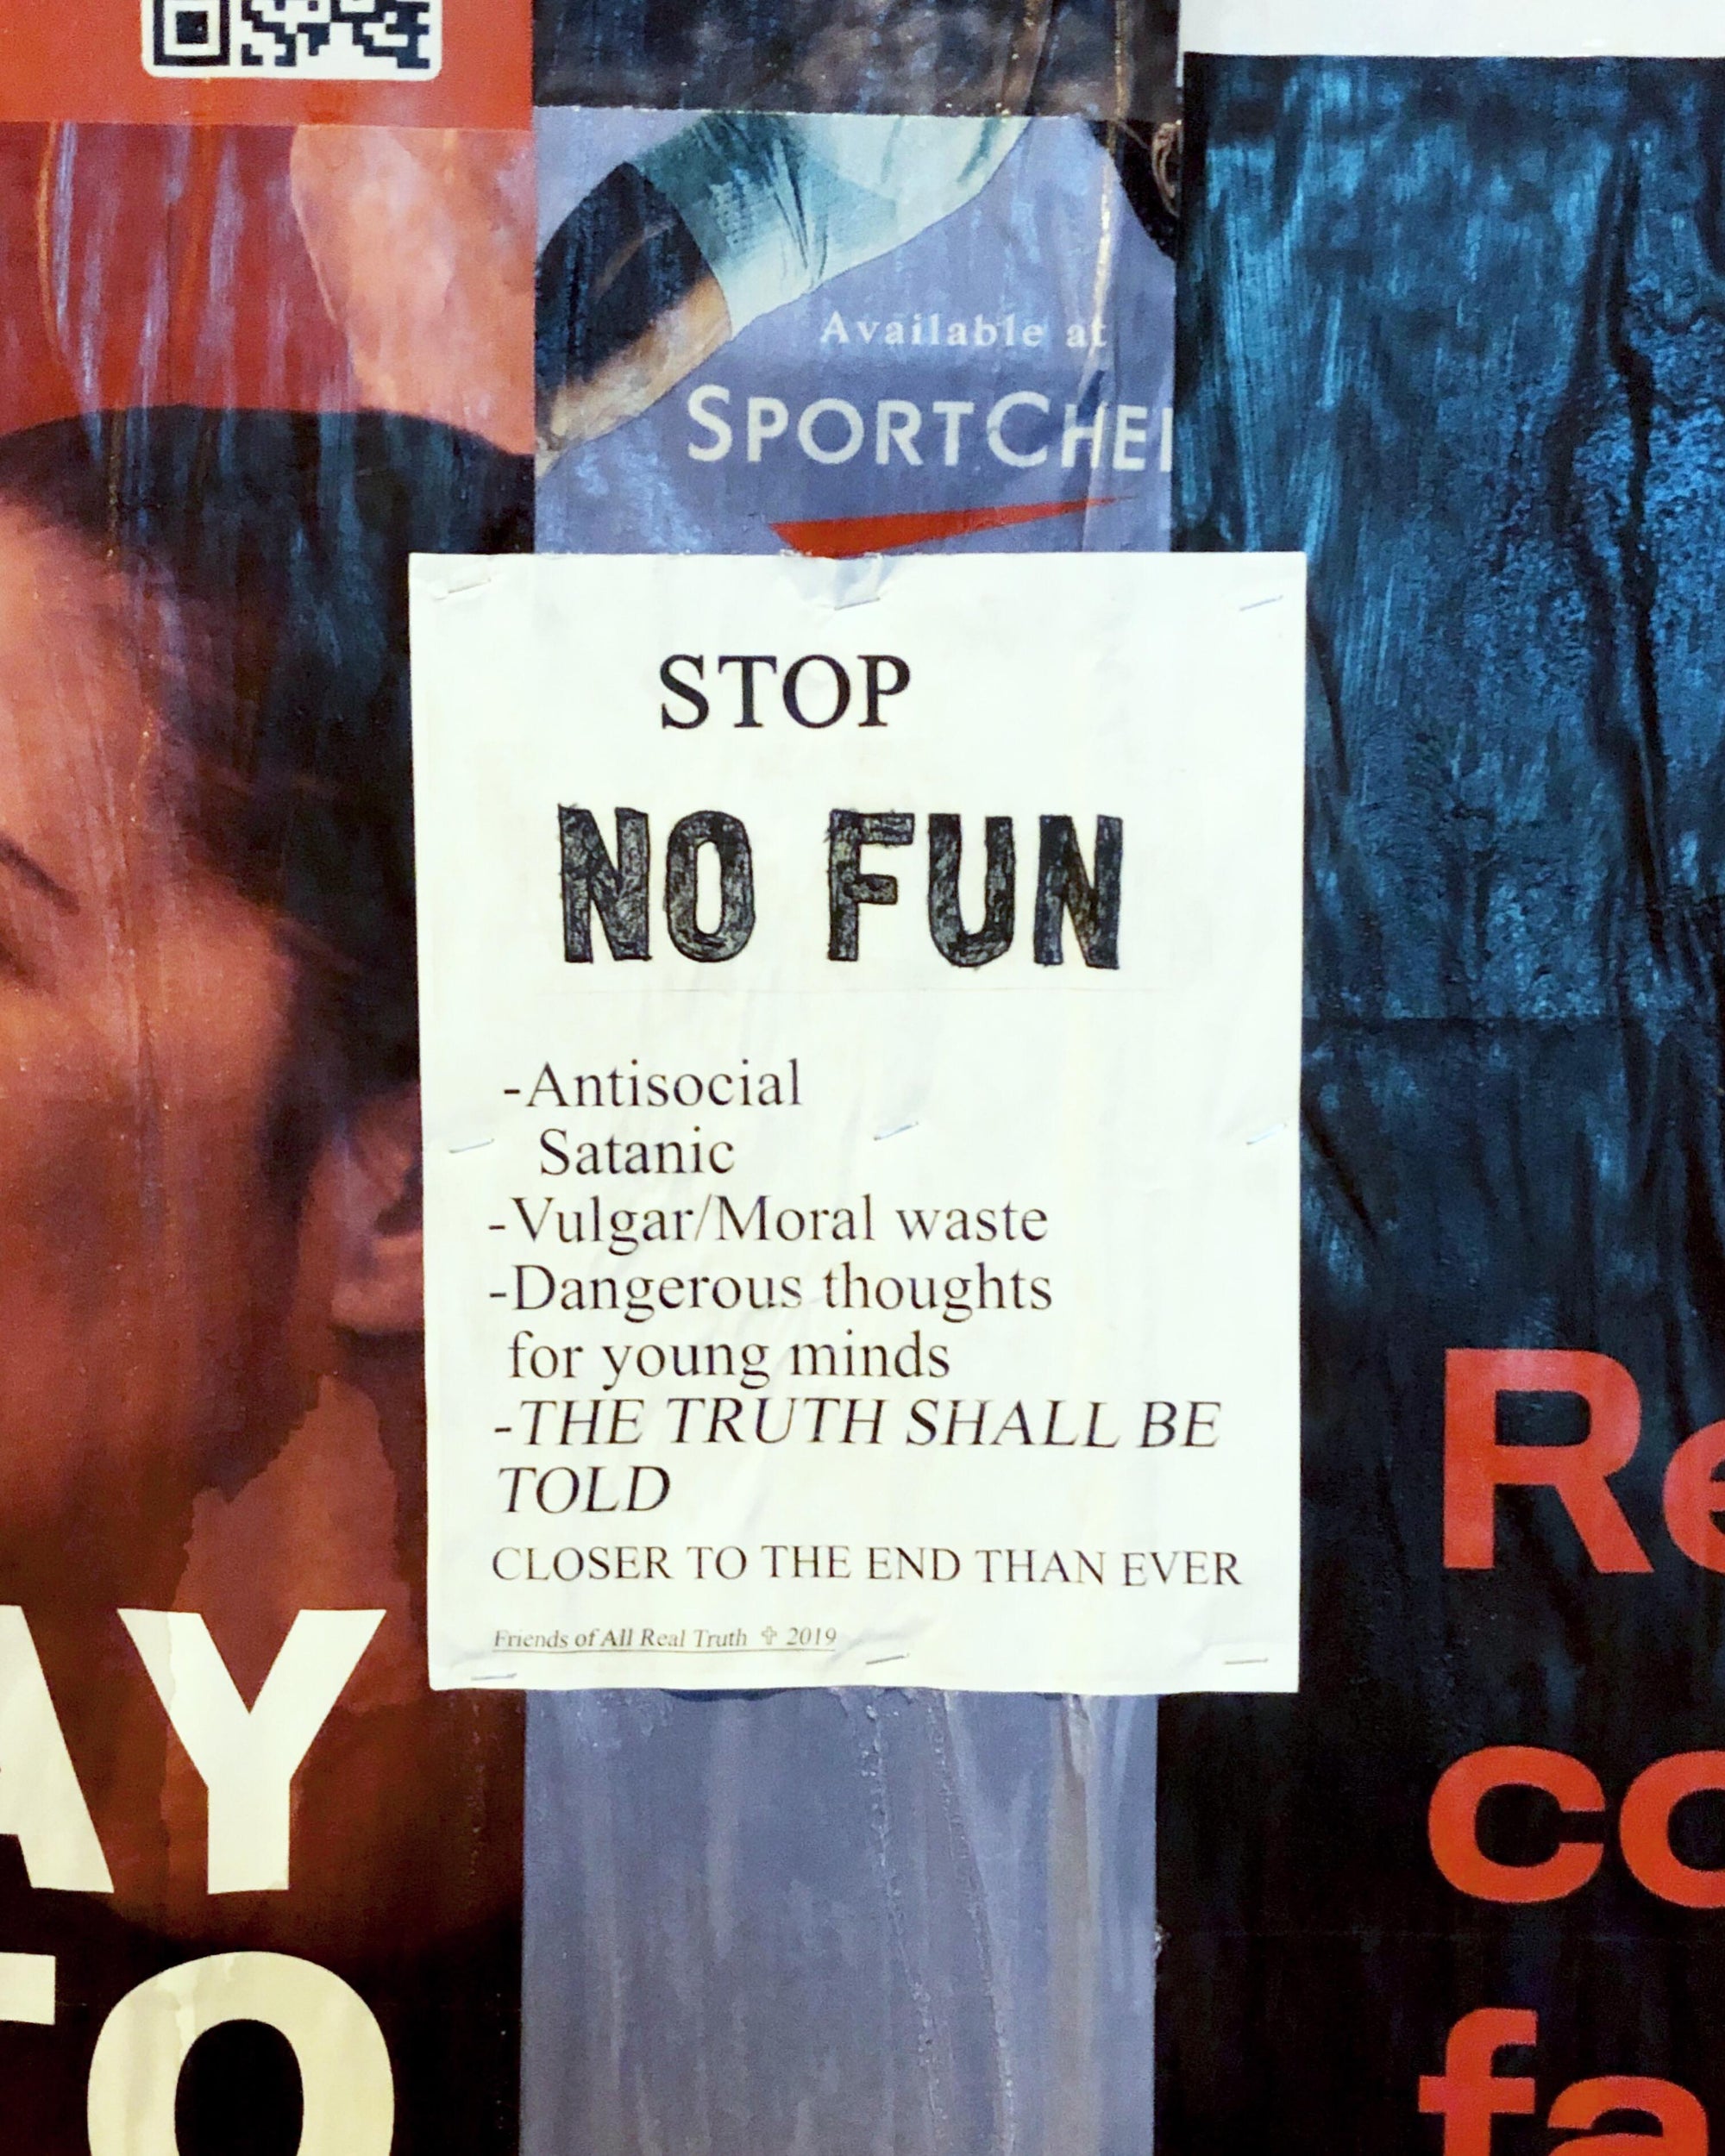 Image of a poster that inspired our "Closer" t-shirt.  The poster is warning people about NO FUN®.